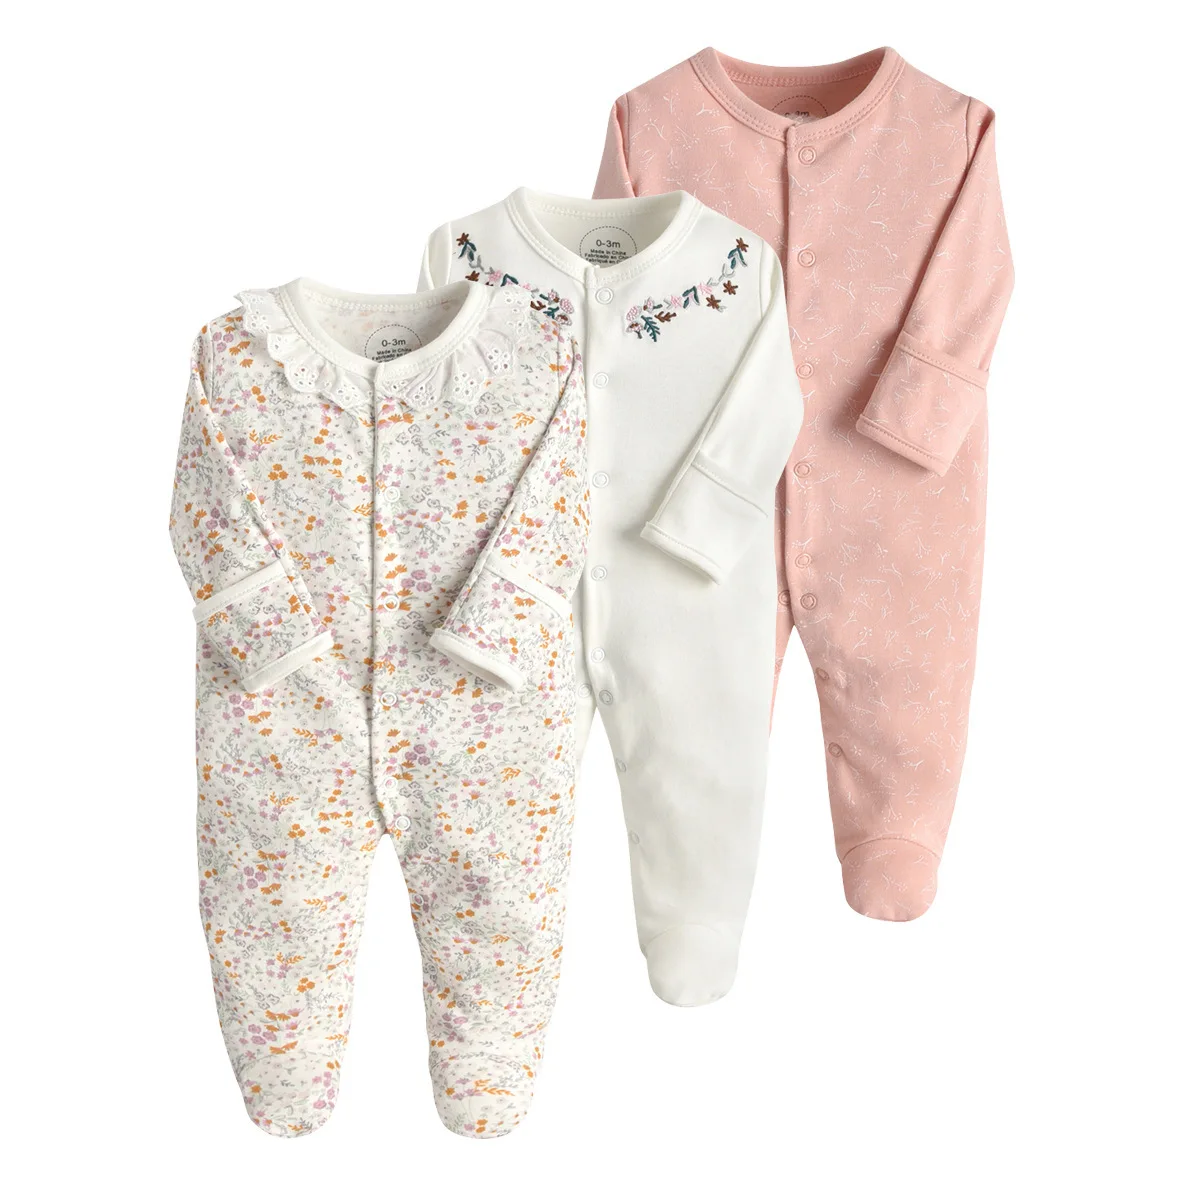 Brand Newborn Babies Clothes Infant Baby Boys Girls Romper Cotton Long Sleeve Pajamas Jumpsuit Toddler Clothes Outfits 3Pcs/Lot